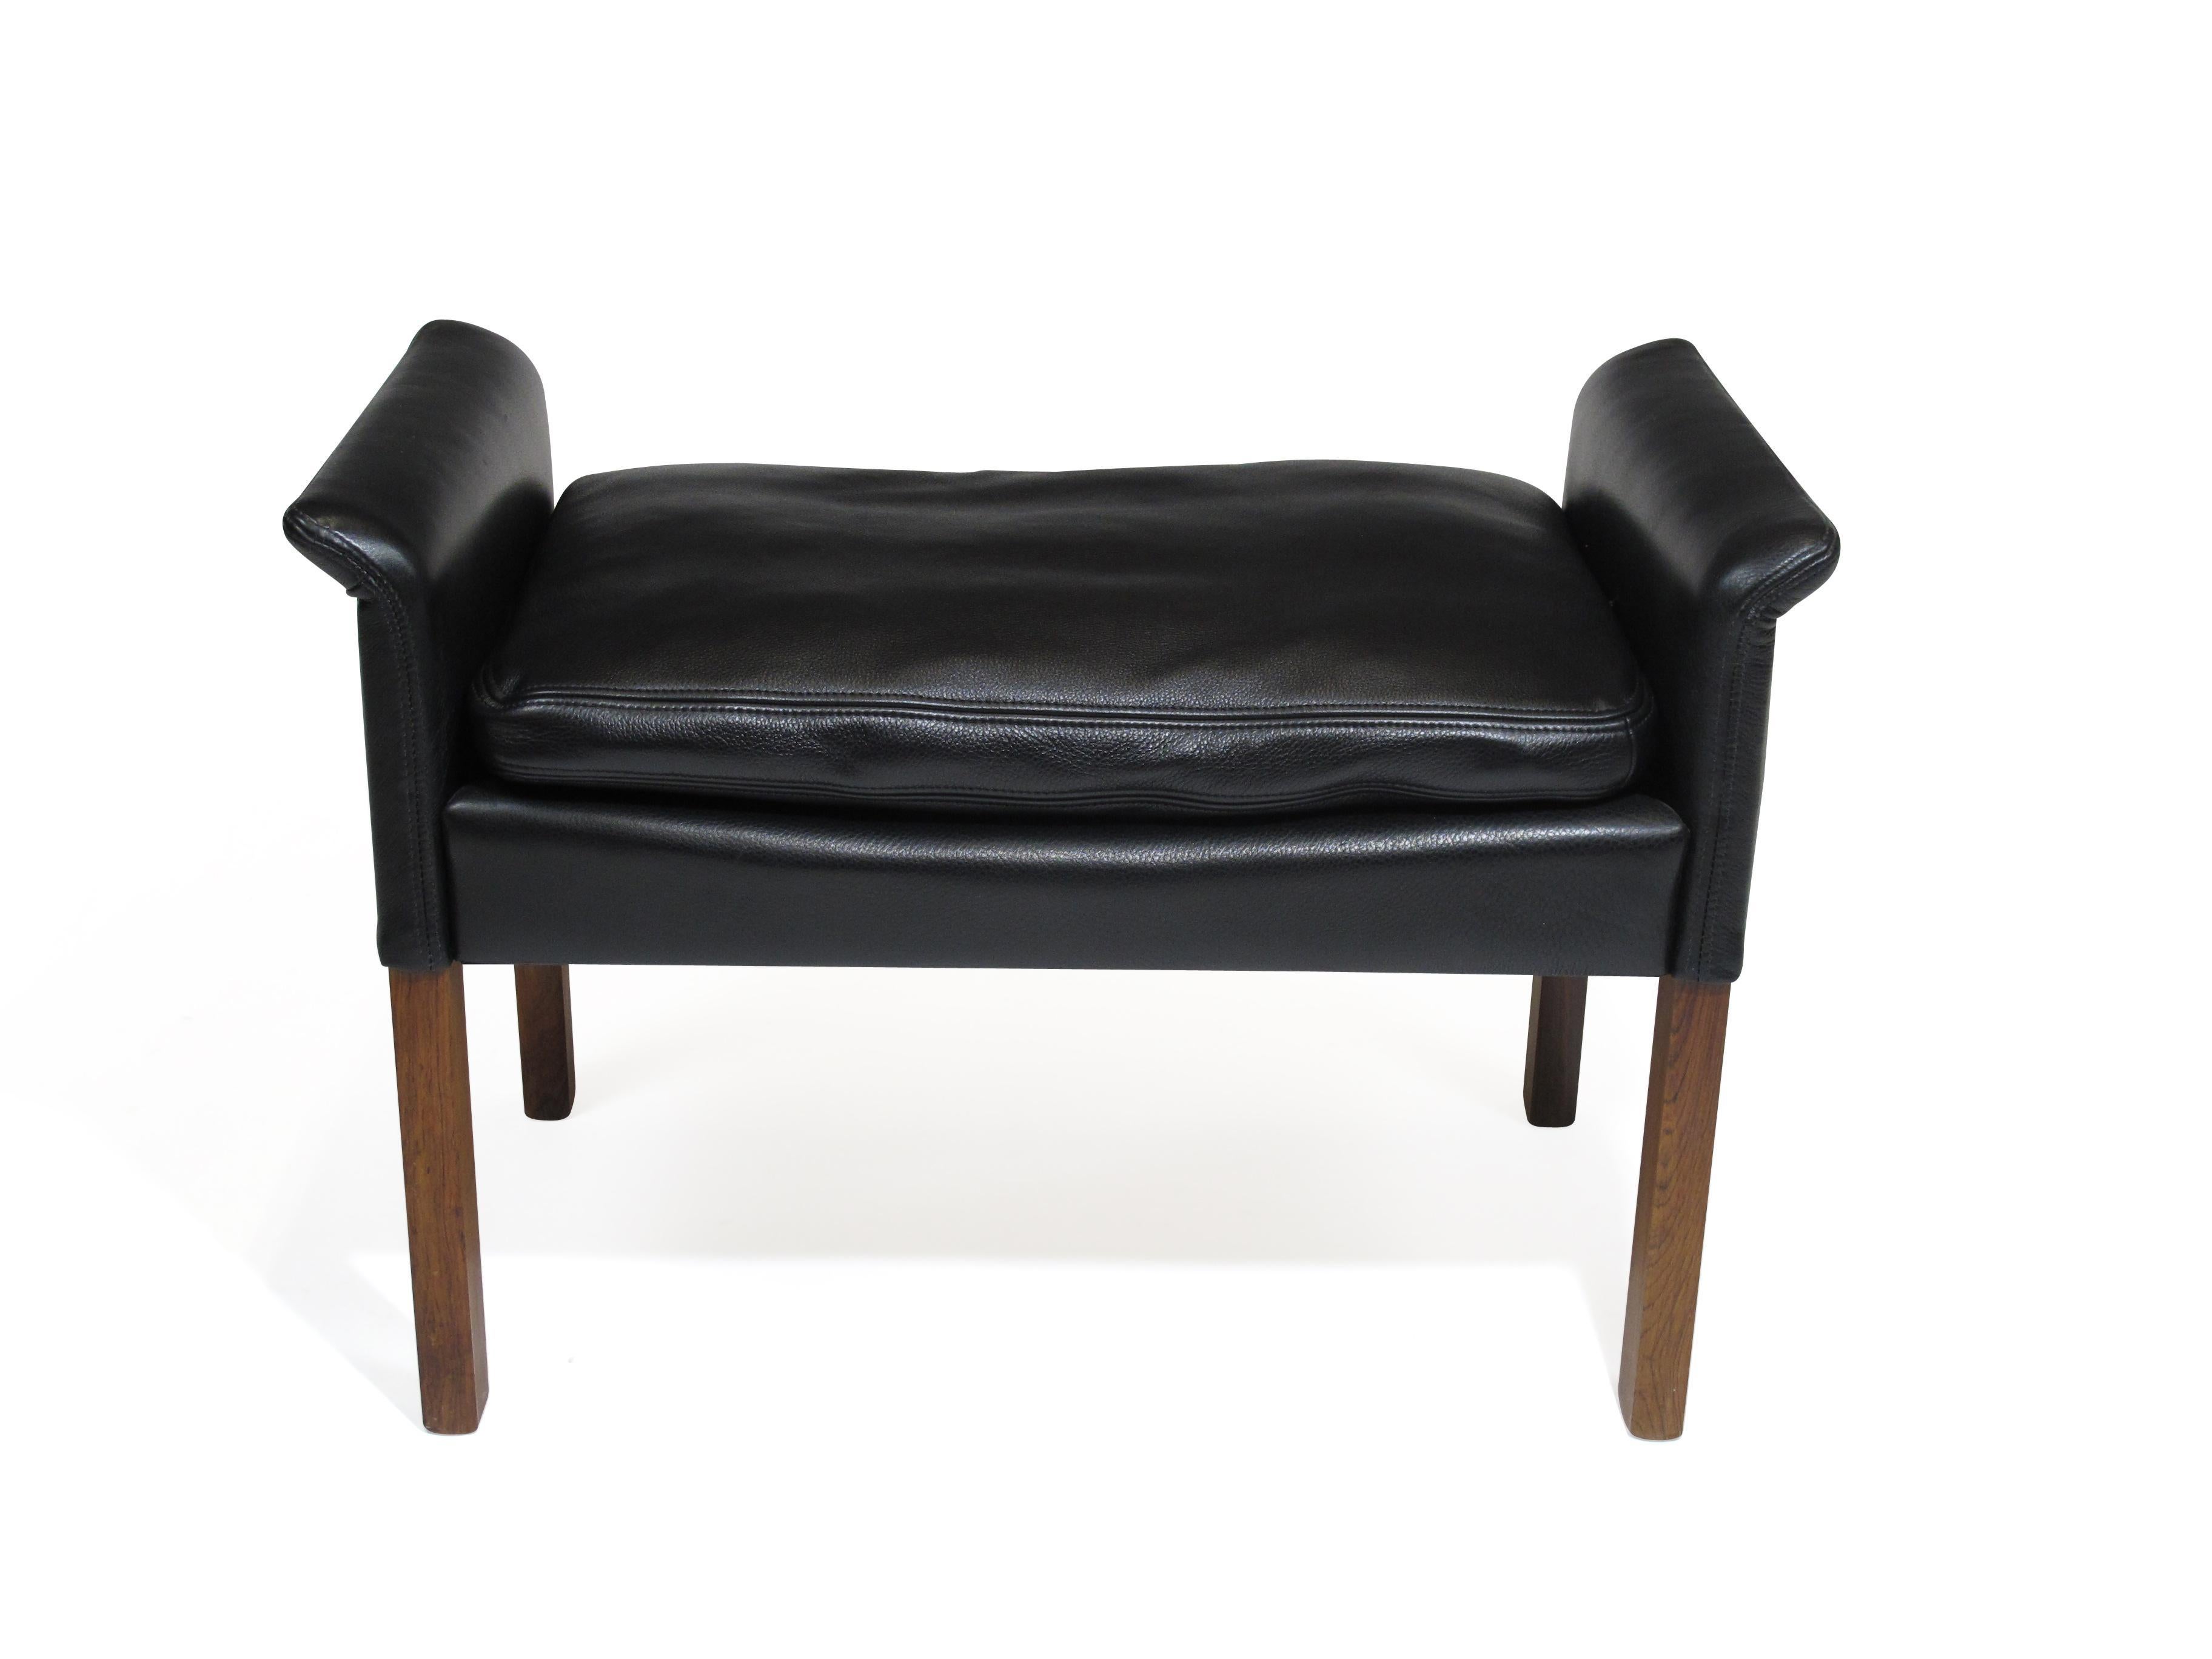 20th Century Hans Olsen Rosewood and Black Leather Ottomans, A Pair